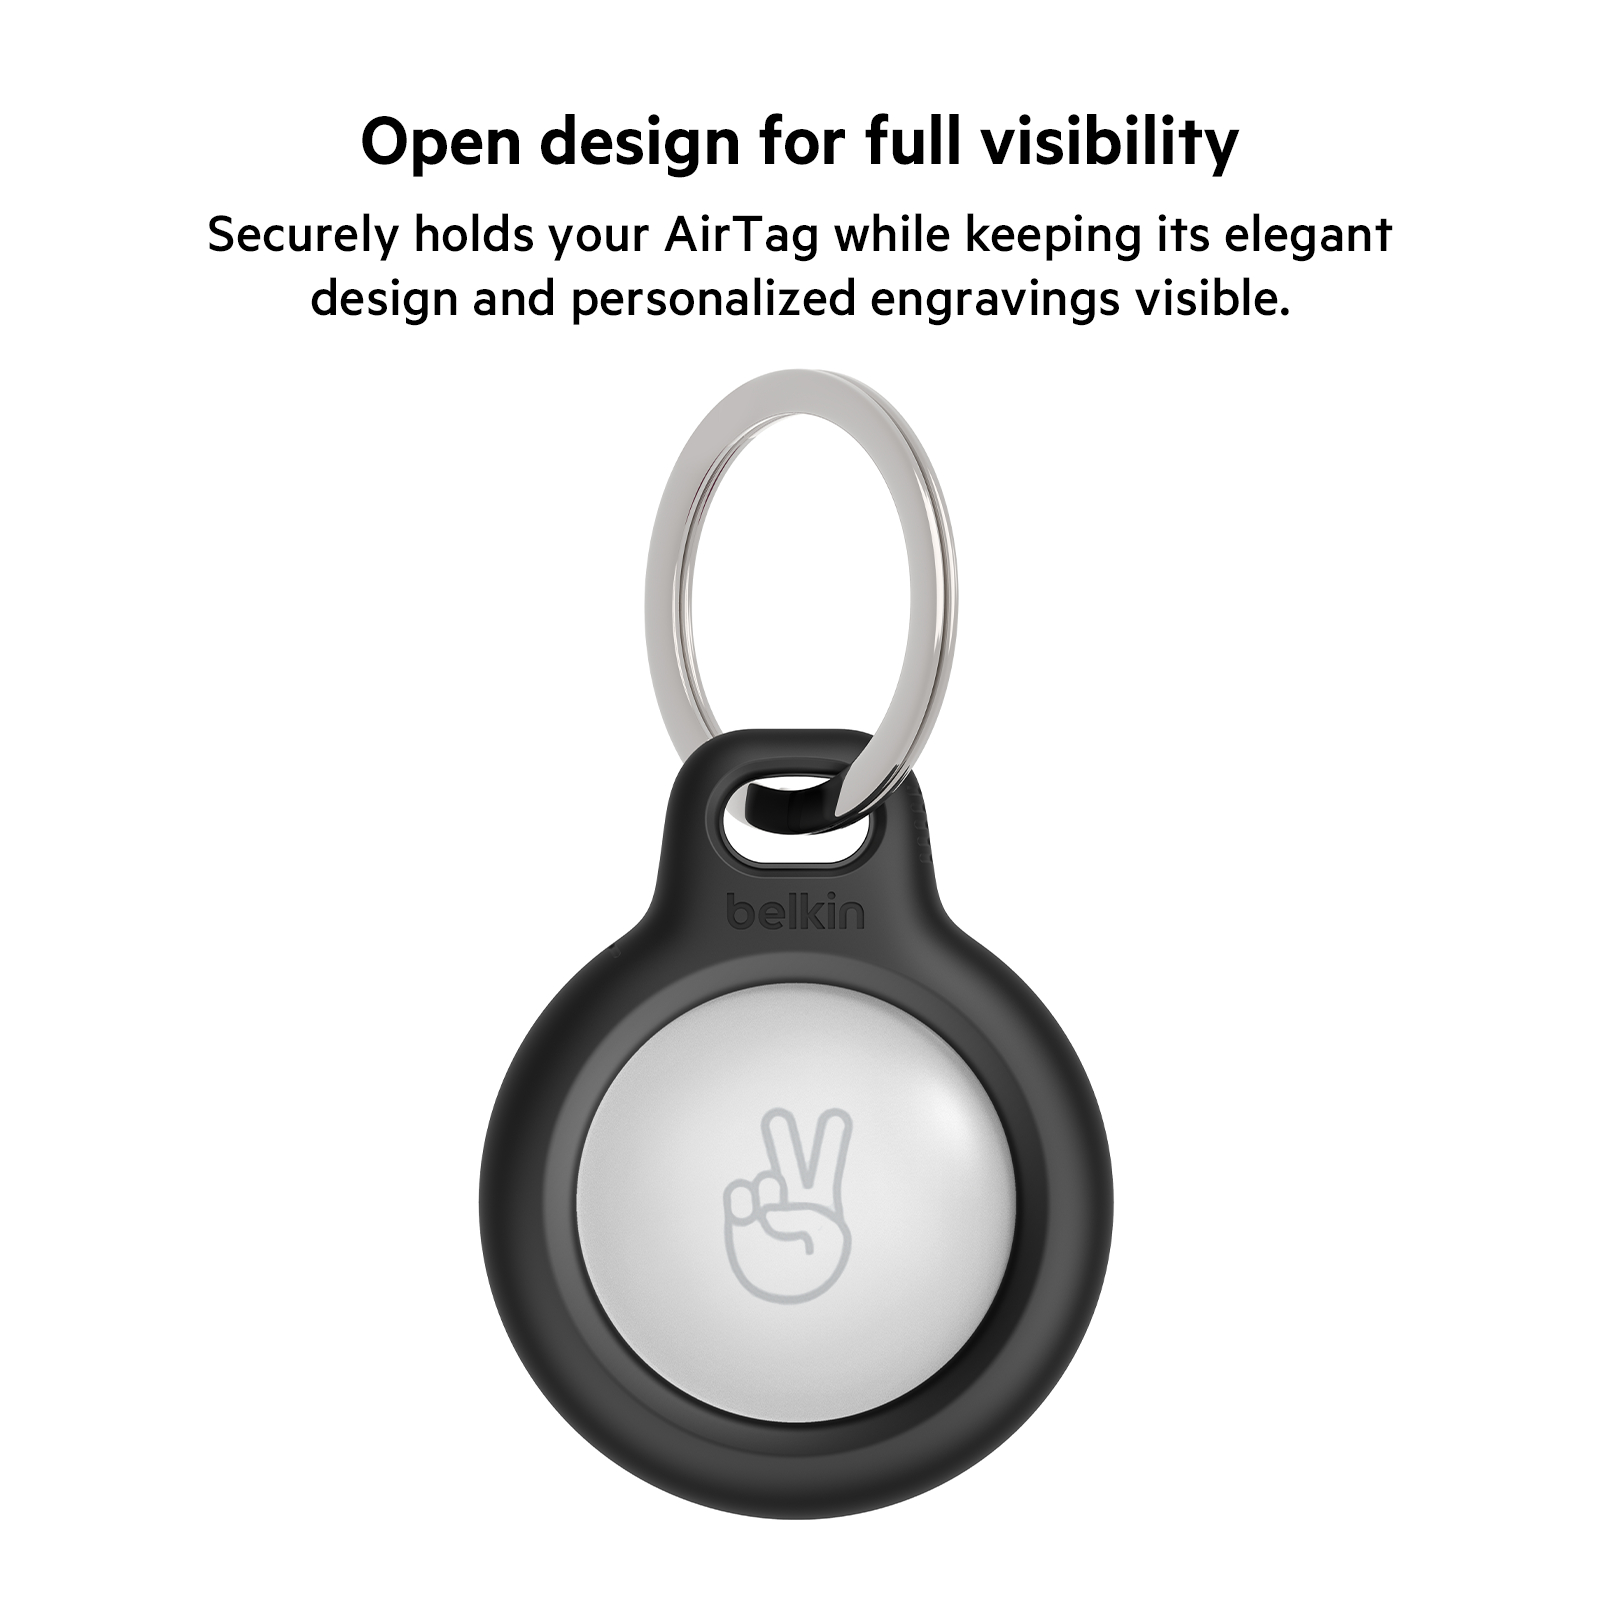 Belkin Secure Holder with Key Ring for AirTag, Black - Walmart.com